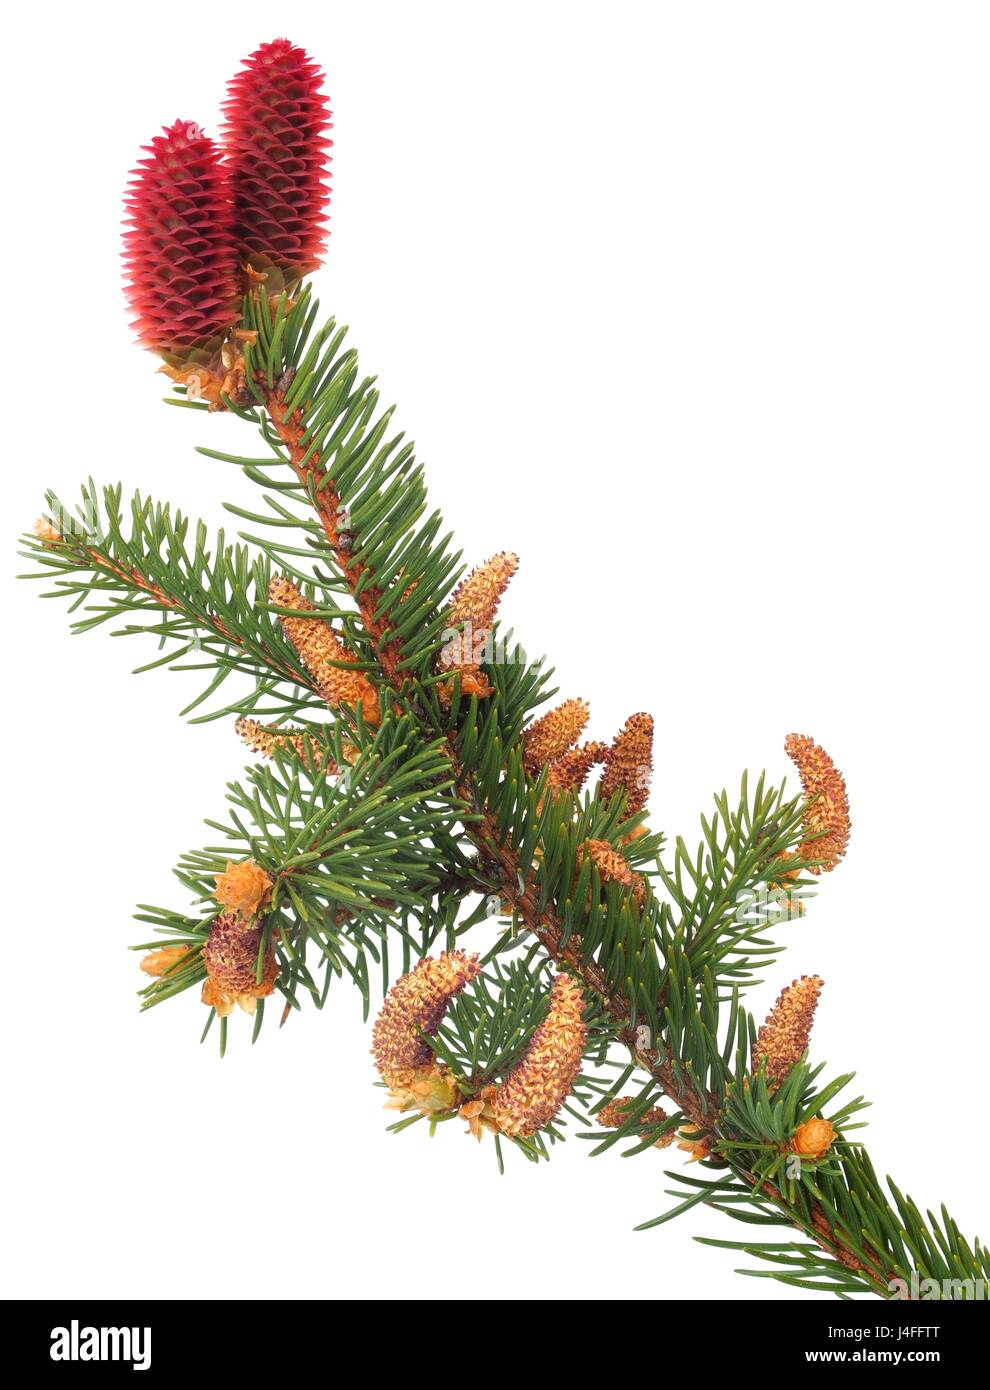 Branch of Norway spruce with male and female flowers Stock Photo